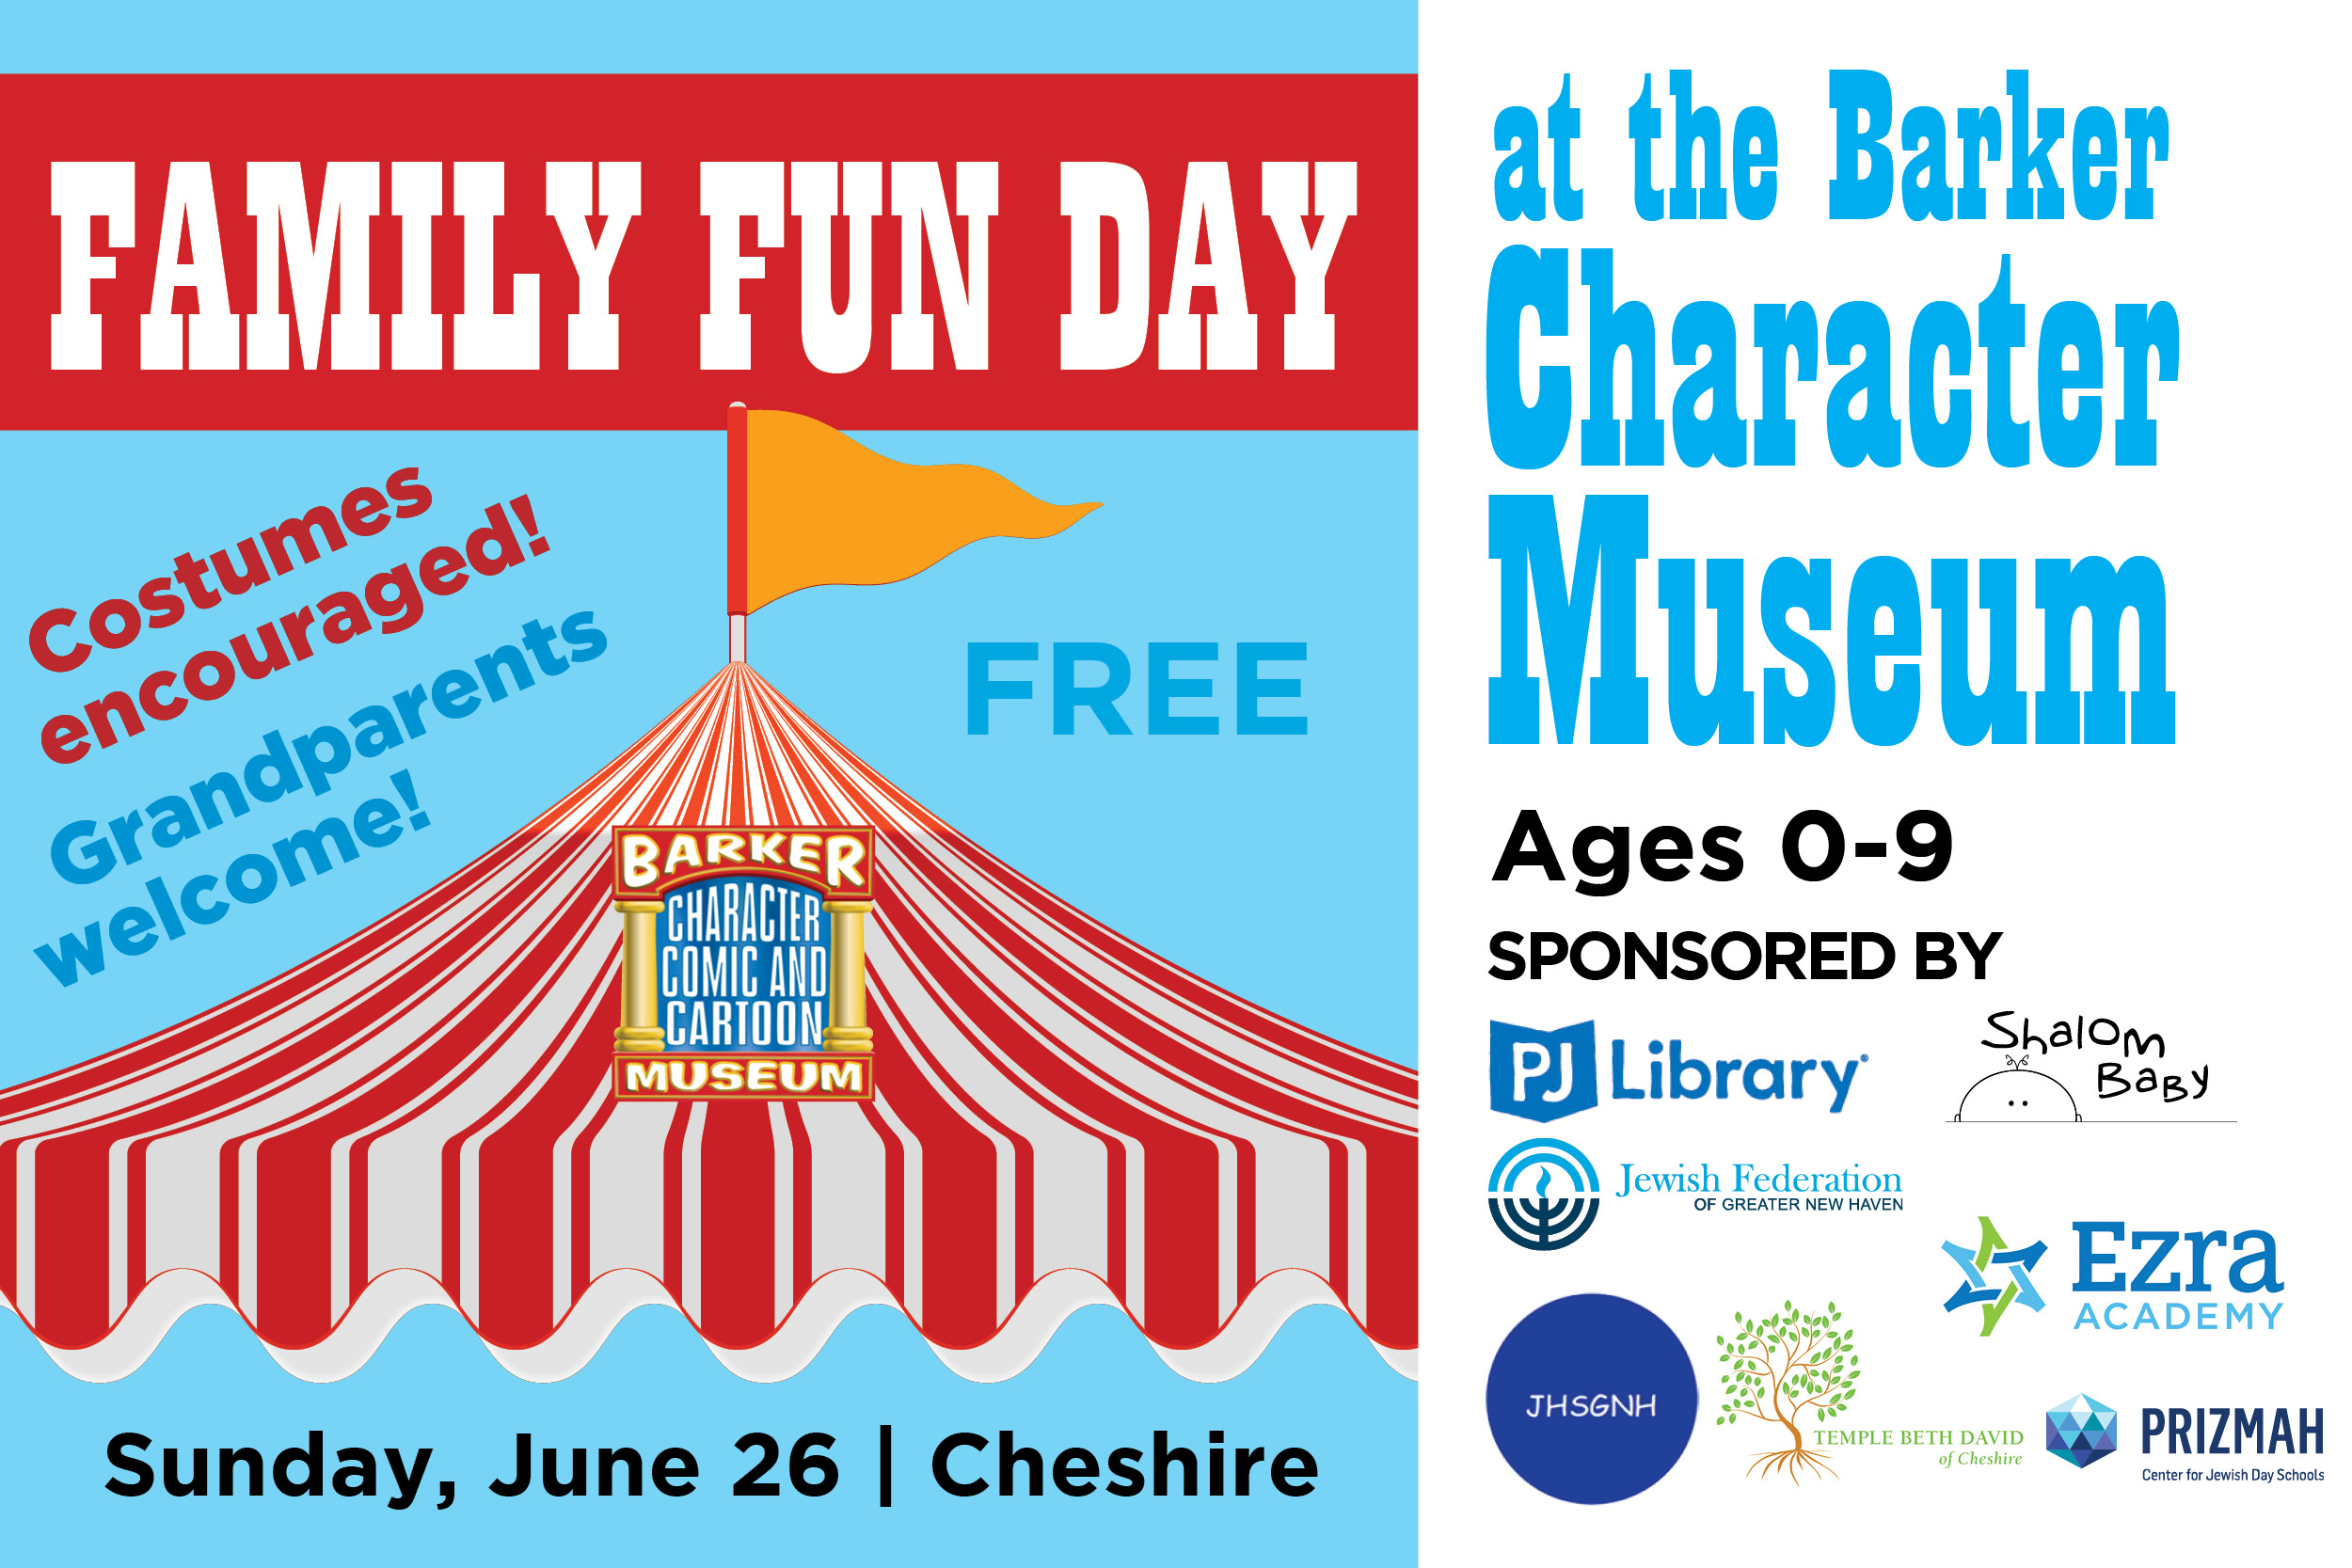 Family Fun Day at the Barker Character Museum | JCC of Greater New Haven